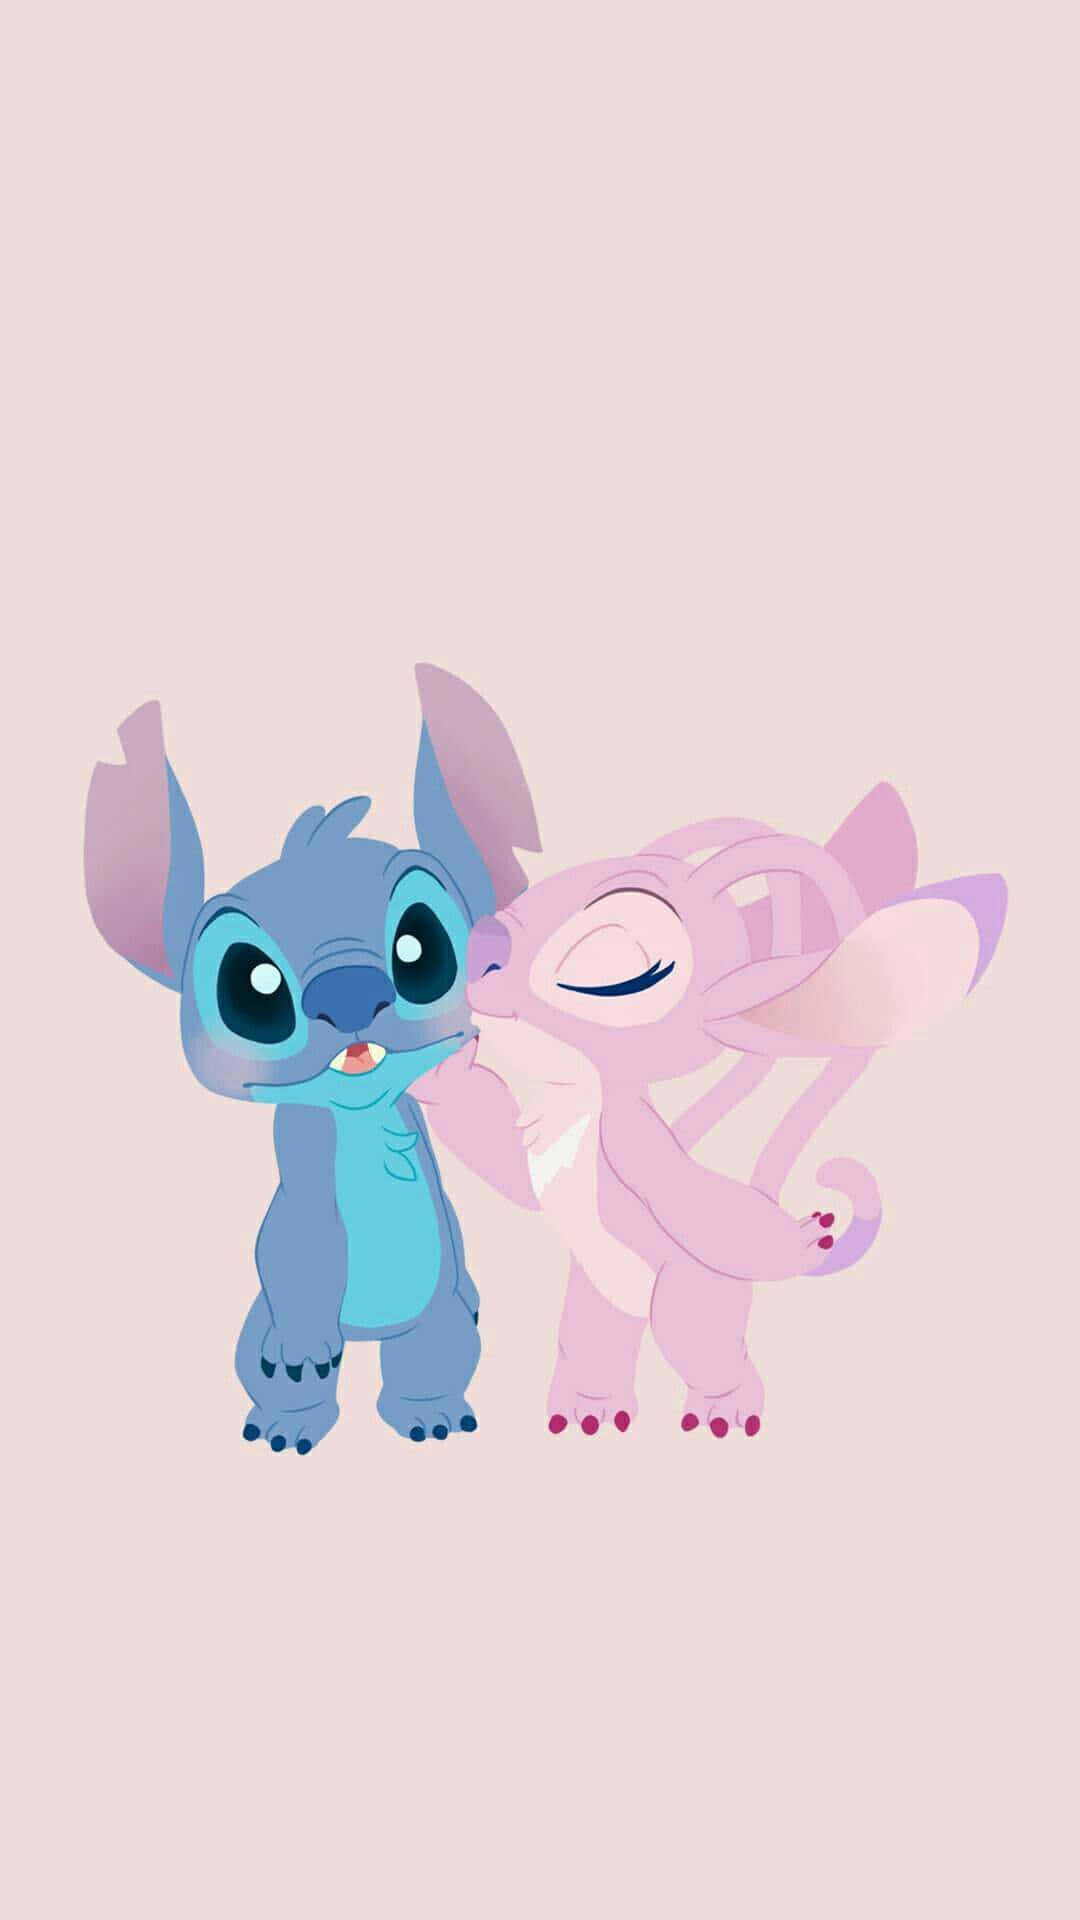 Get ready for the ultimate romcom: Stitch and Angel's cutest couple moment! Wallpaper